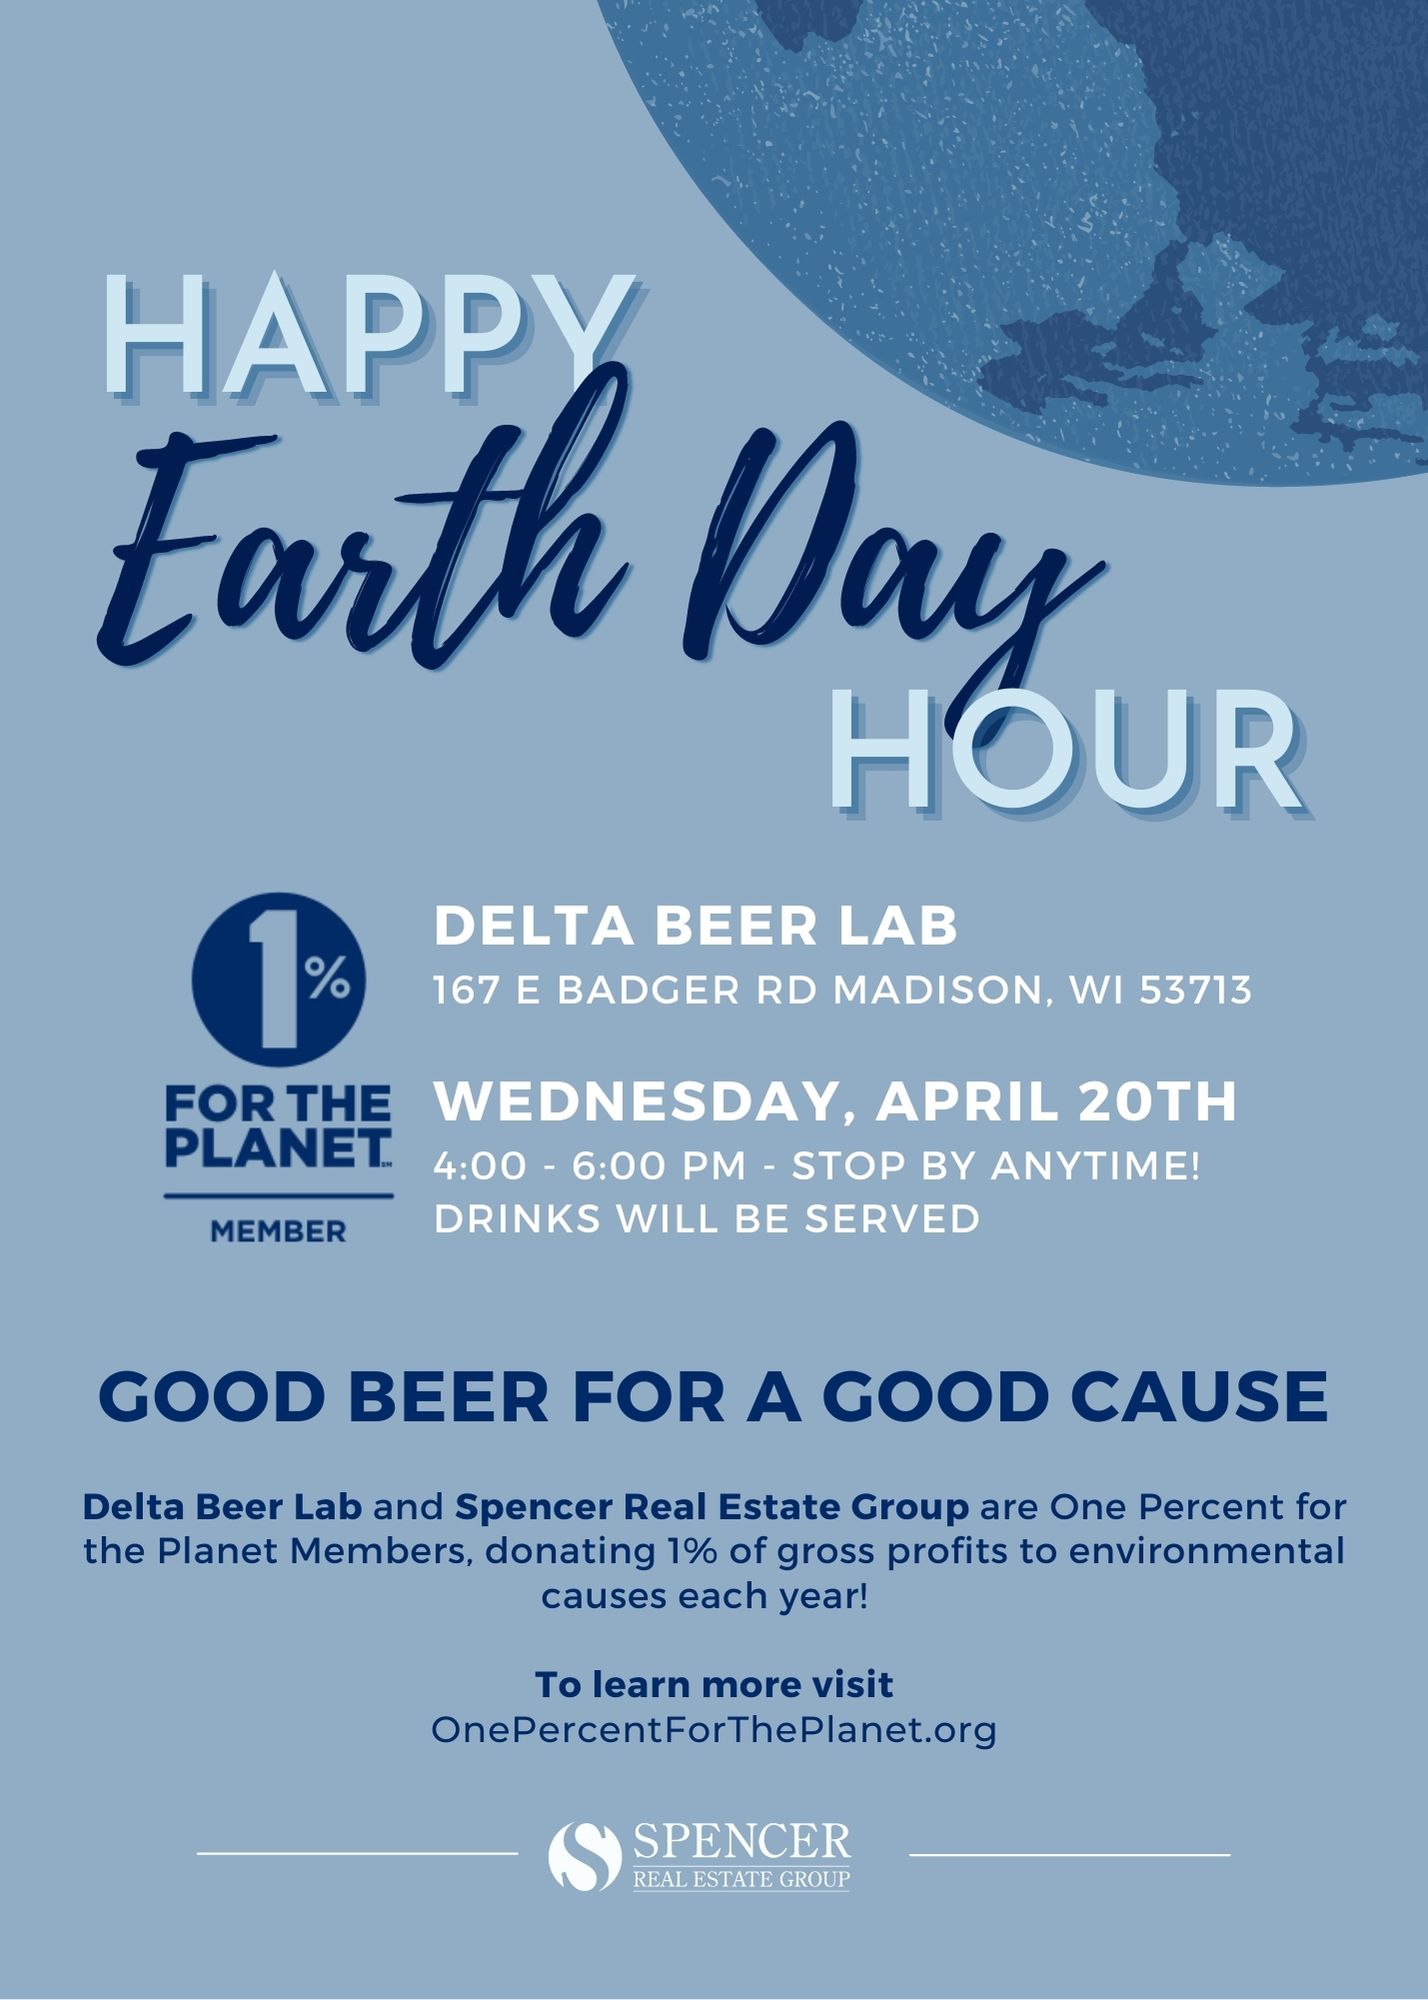 Happy Earth Day Hour